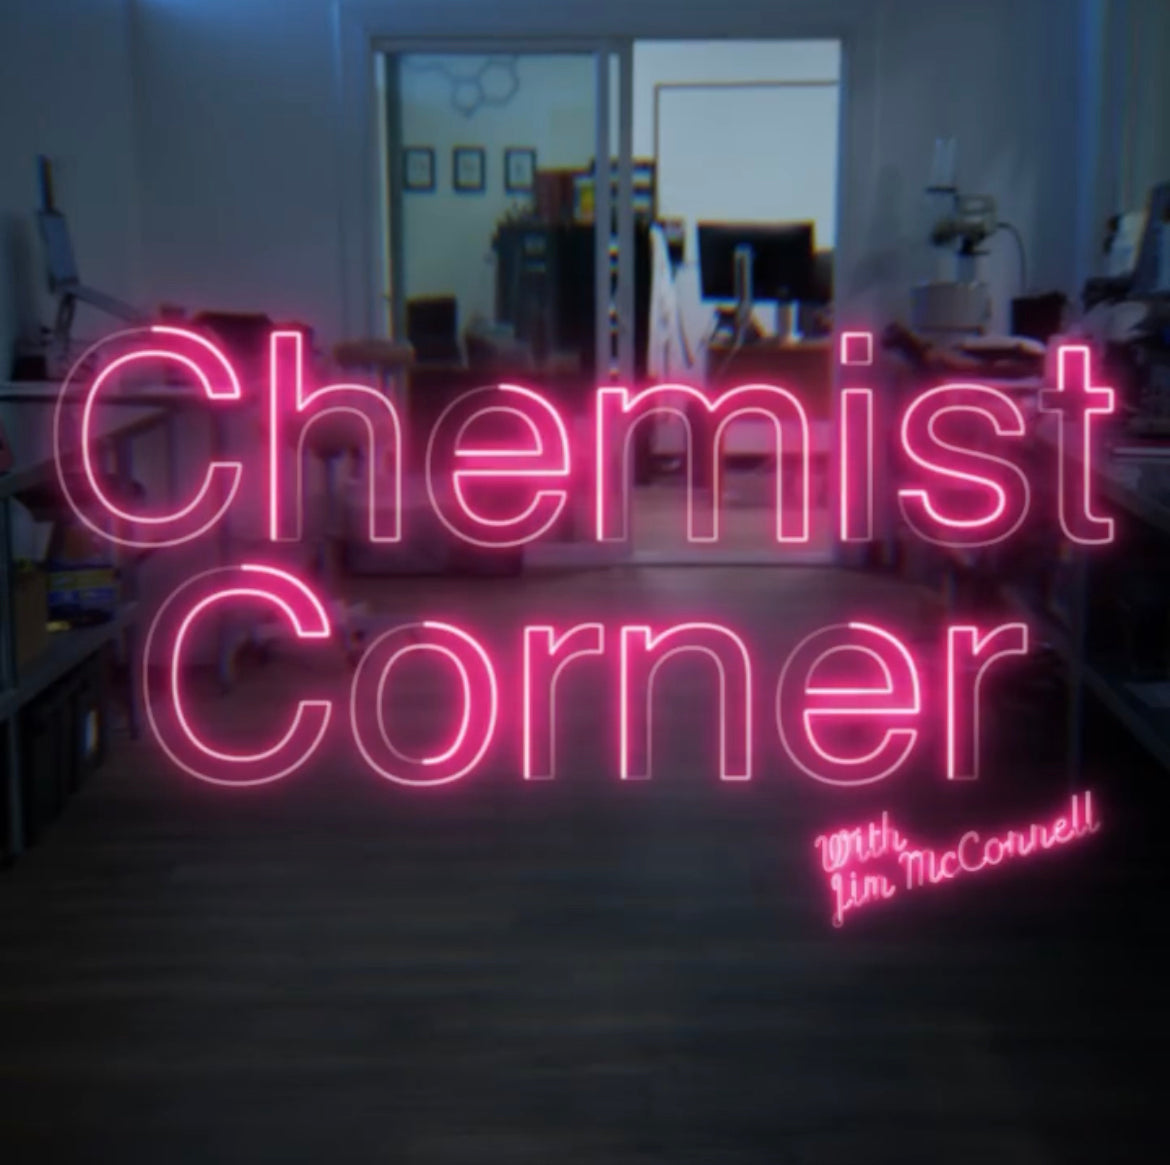 NEW Chemist Corner Video Series with Jim McConnell featuring Liz Morris from The Nail Hub